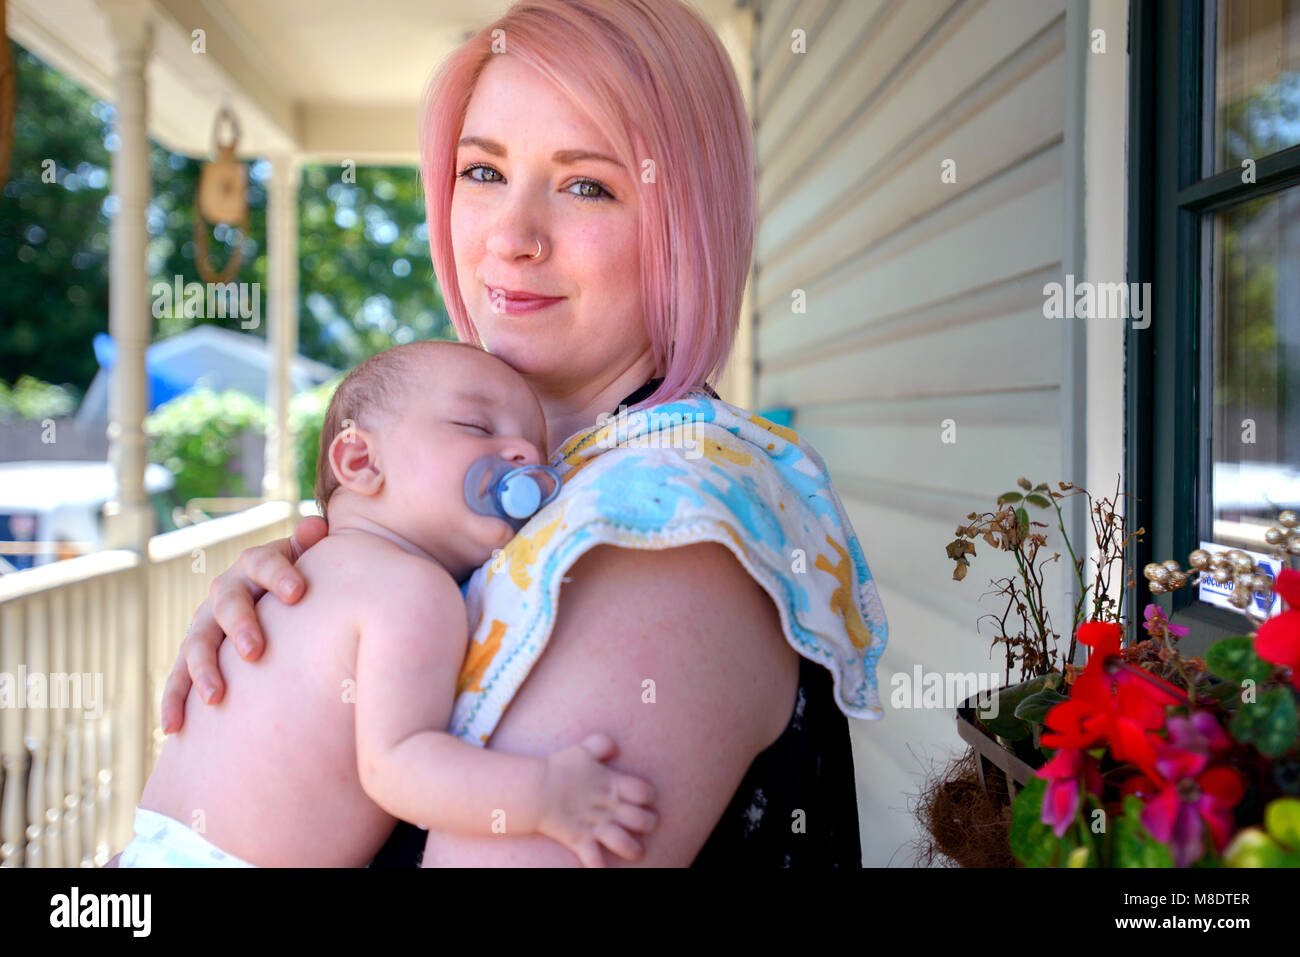 Woman with baby boy in arms Banque D'Images